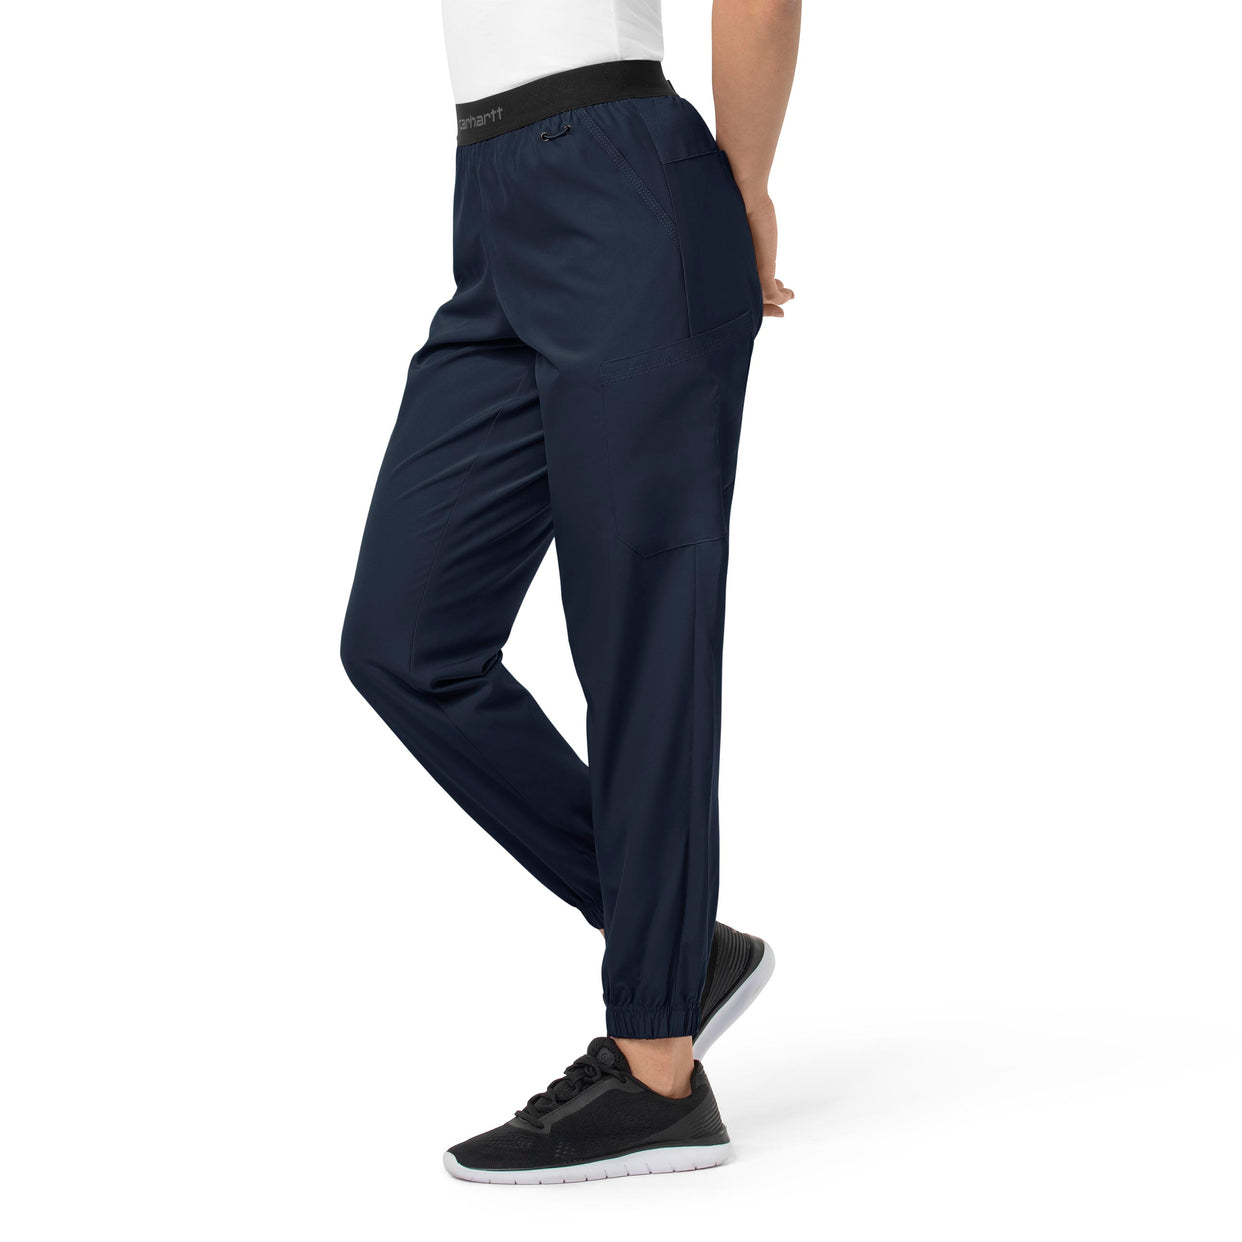 Force Liberty Women's Comfort Cargo Jogger Scrub Pant Navy side view